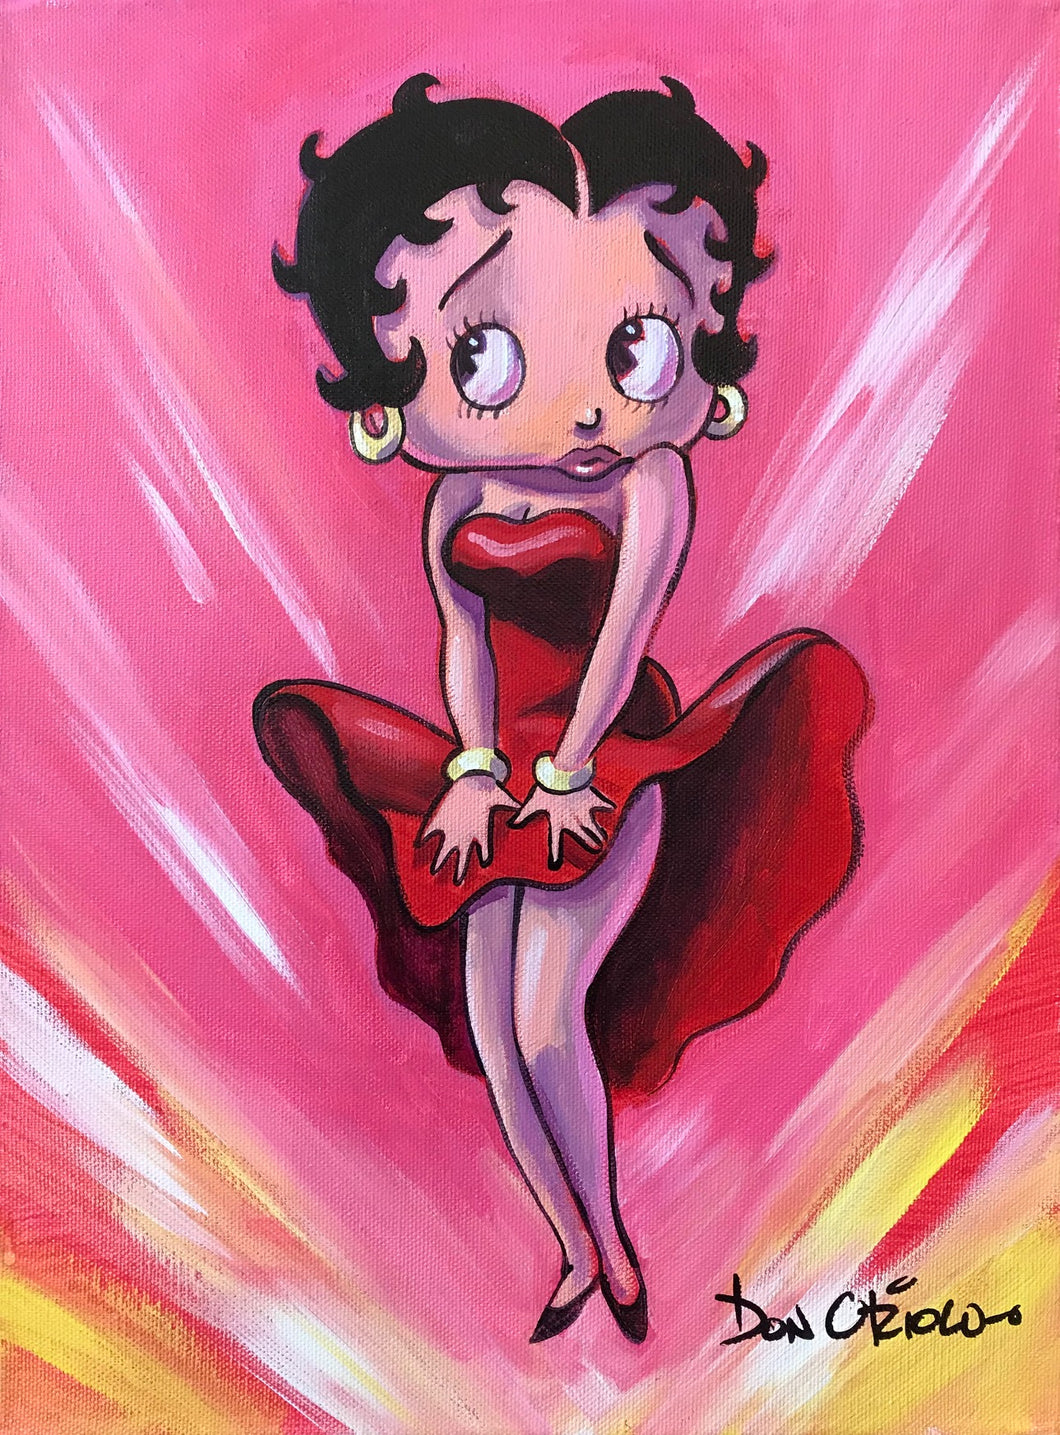 I WANNA BE LOVED BY YOU - BETTY BOOP